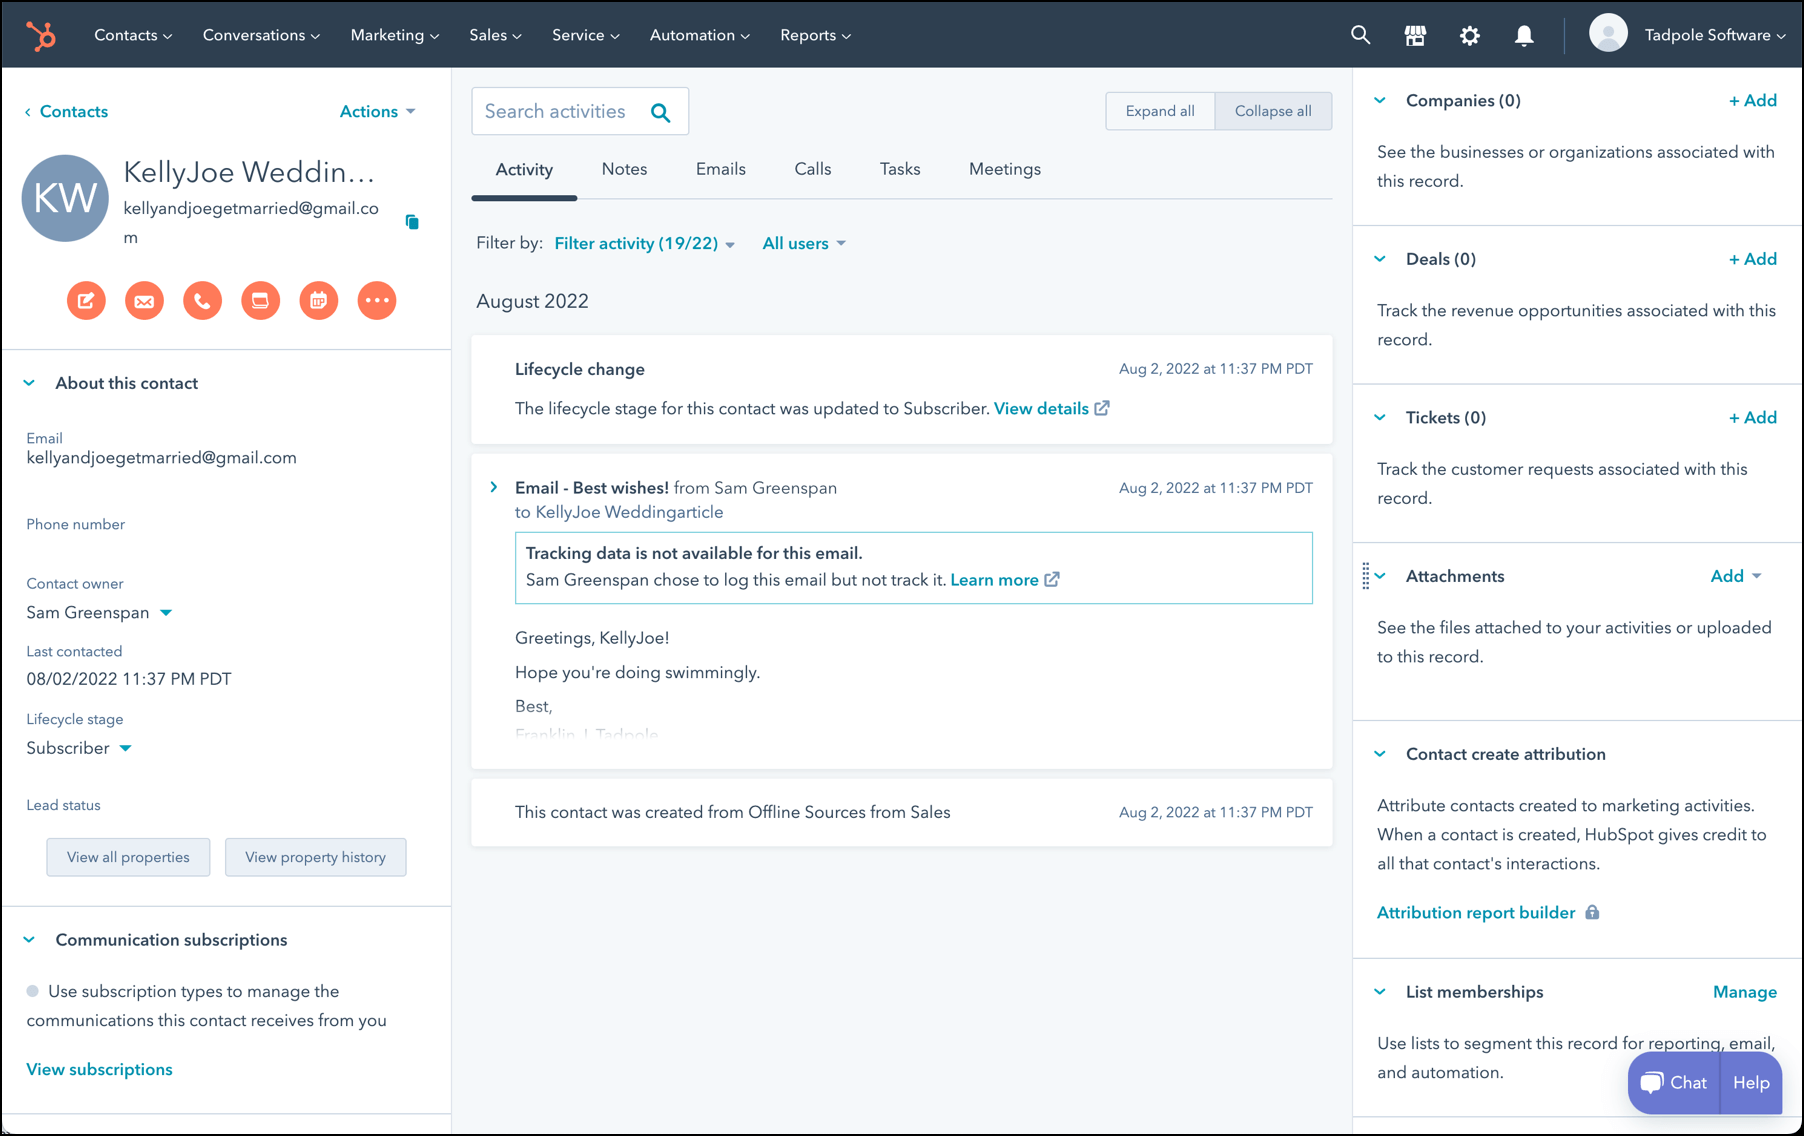 Viewing the contact in Hubspot